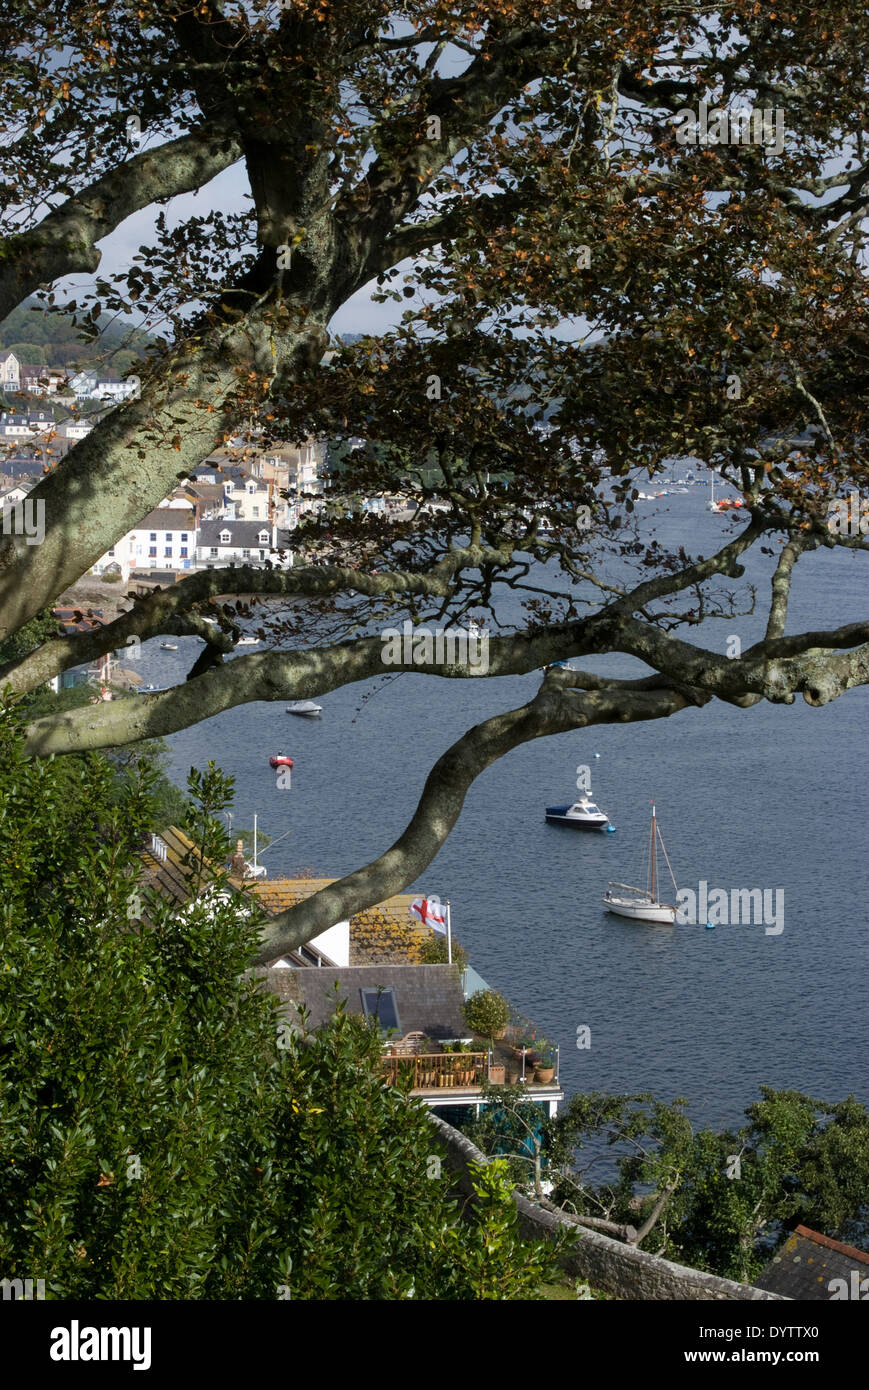 View of the town and the River Dart, Dartmouth, Devon, UK Stock Photo